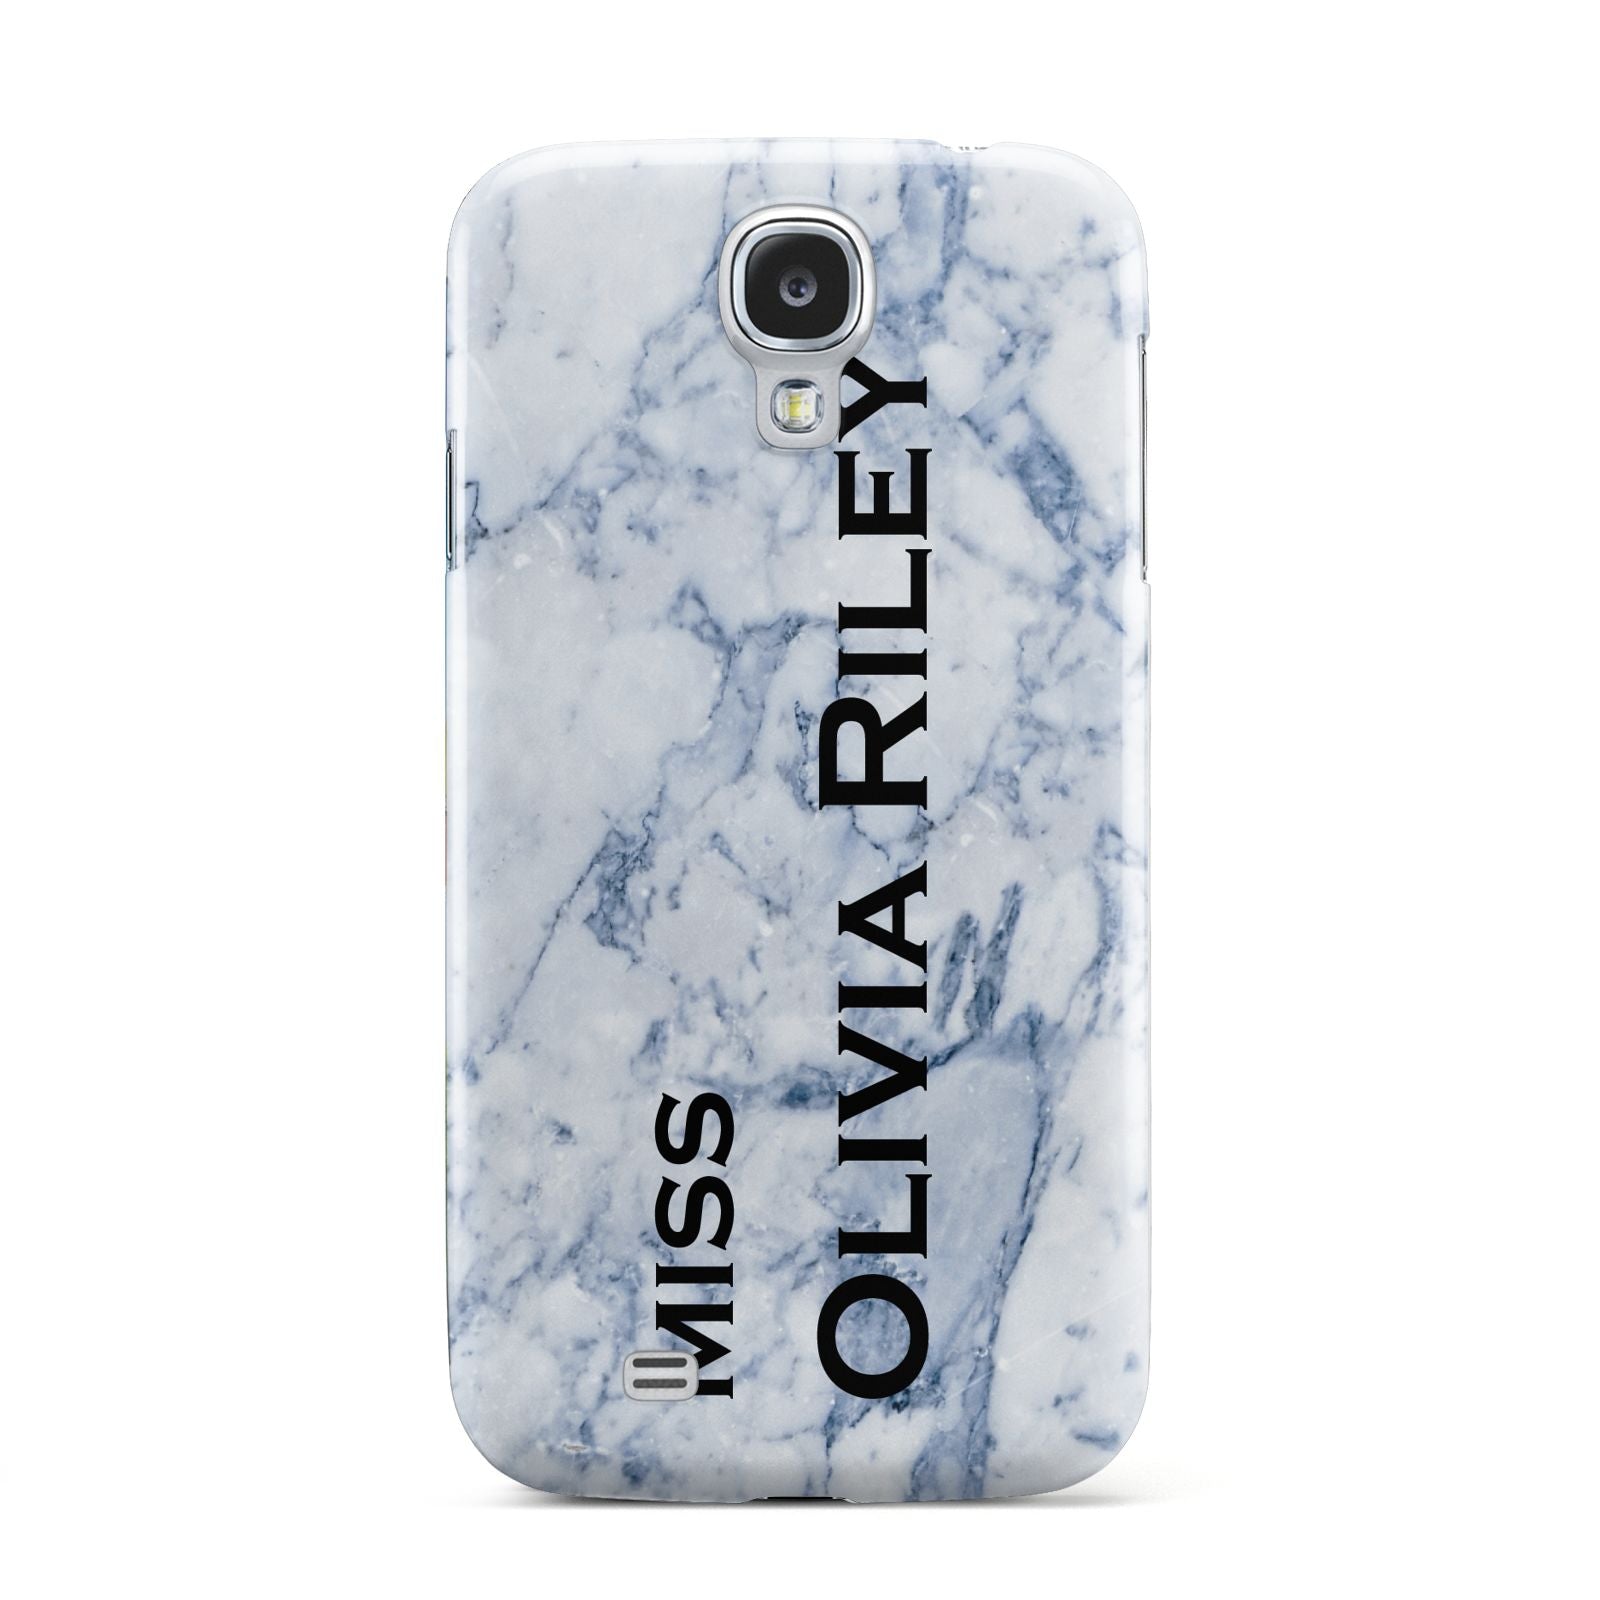 Full Name Grey Marble Samsung Galaxy S4 Case